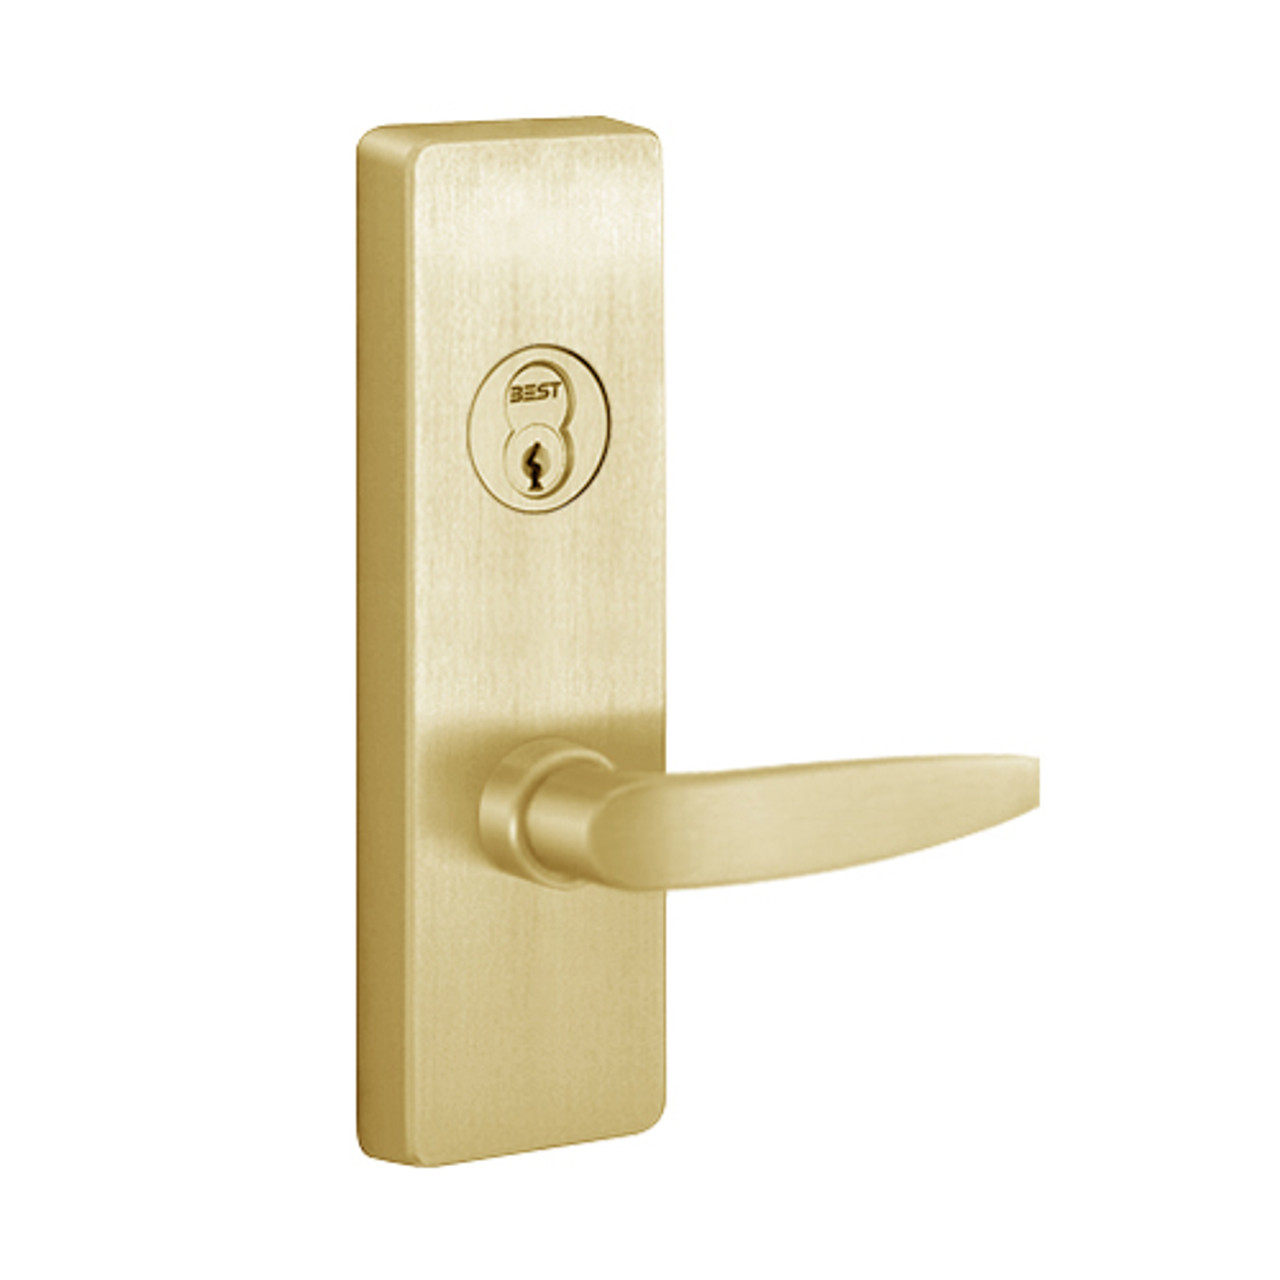 4908B-606-RHR PHI Key Controls Lever Trim with B Lever Design for Apex and Olympian Series Exit Device in Satin Brass Finish